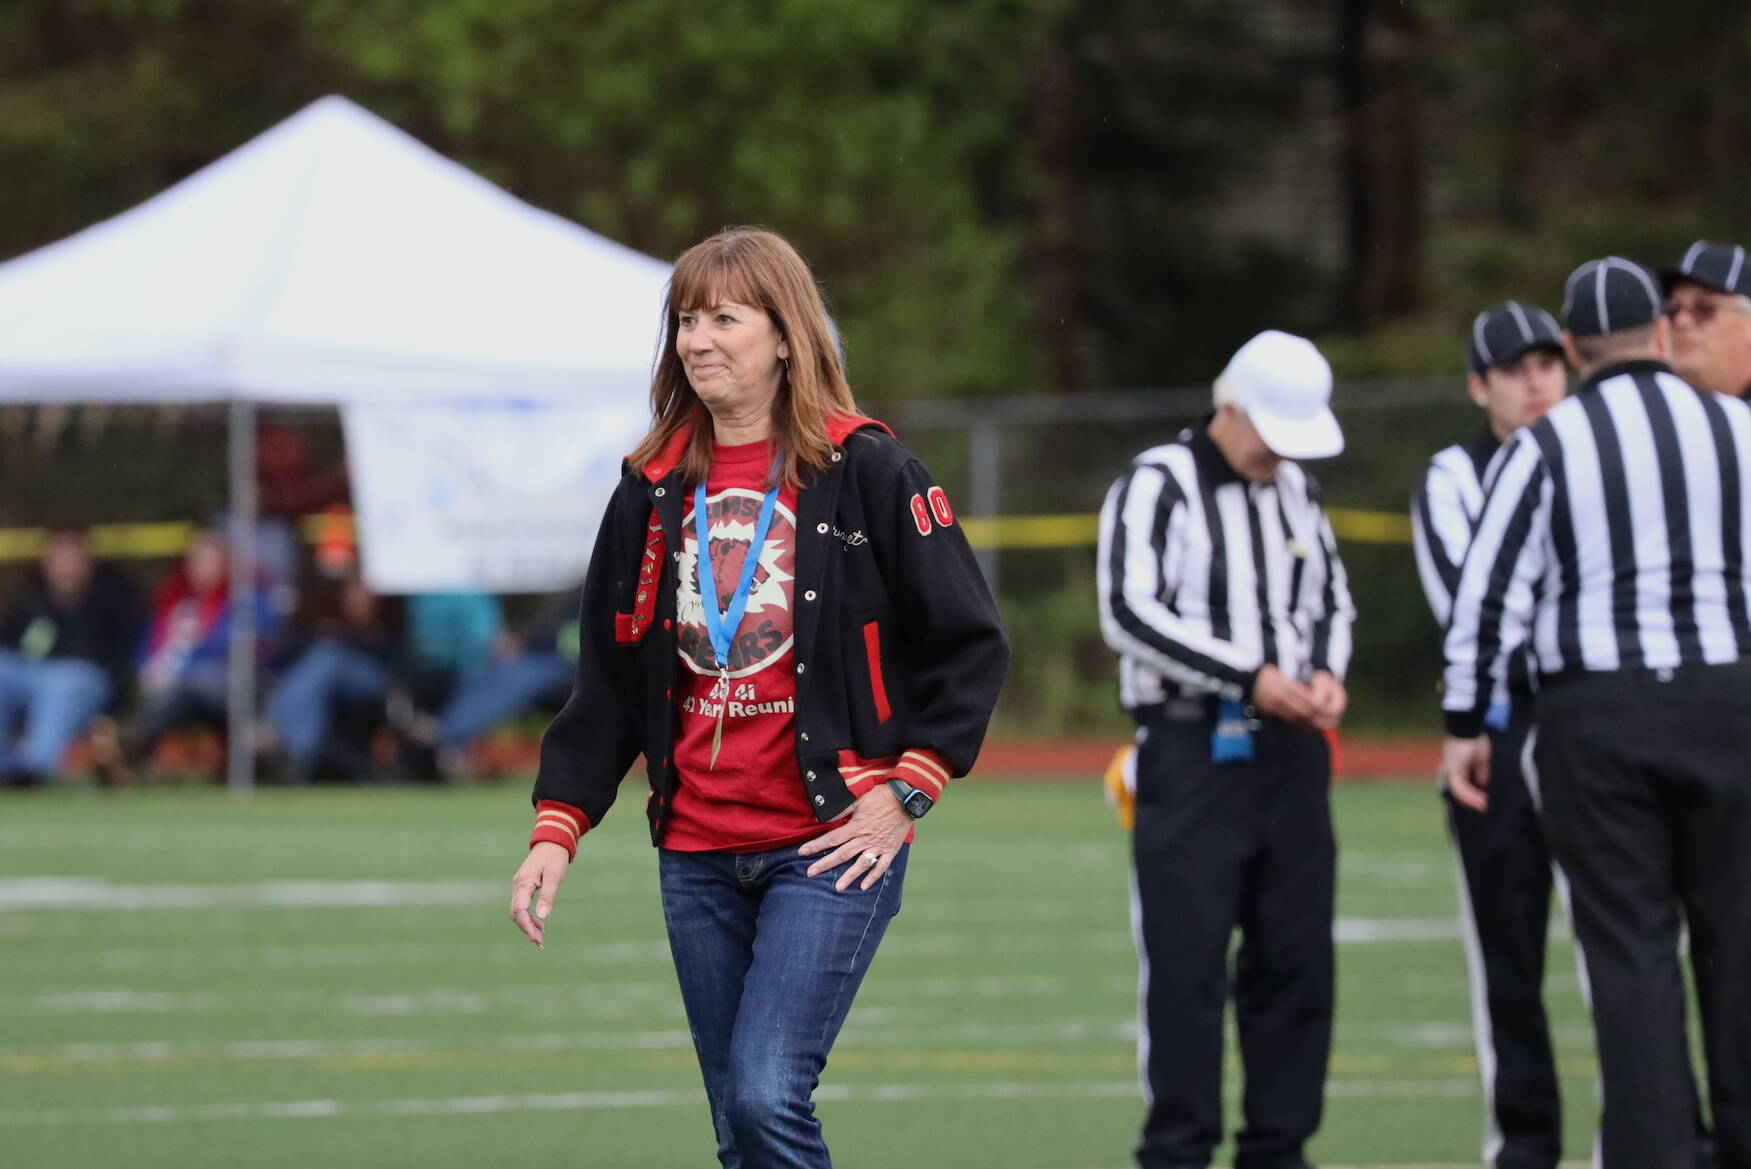 Outgoing Juneau School District Superintendent Bridget Weiss walks off the field after participating as the game’s honorary coin tosser. (Clarise Larson / Juneau Empire)